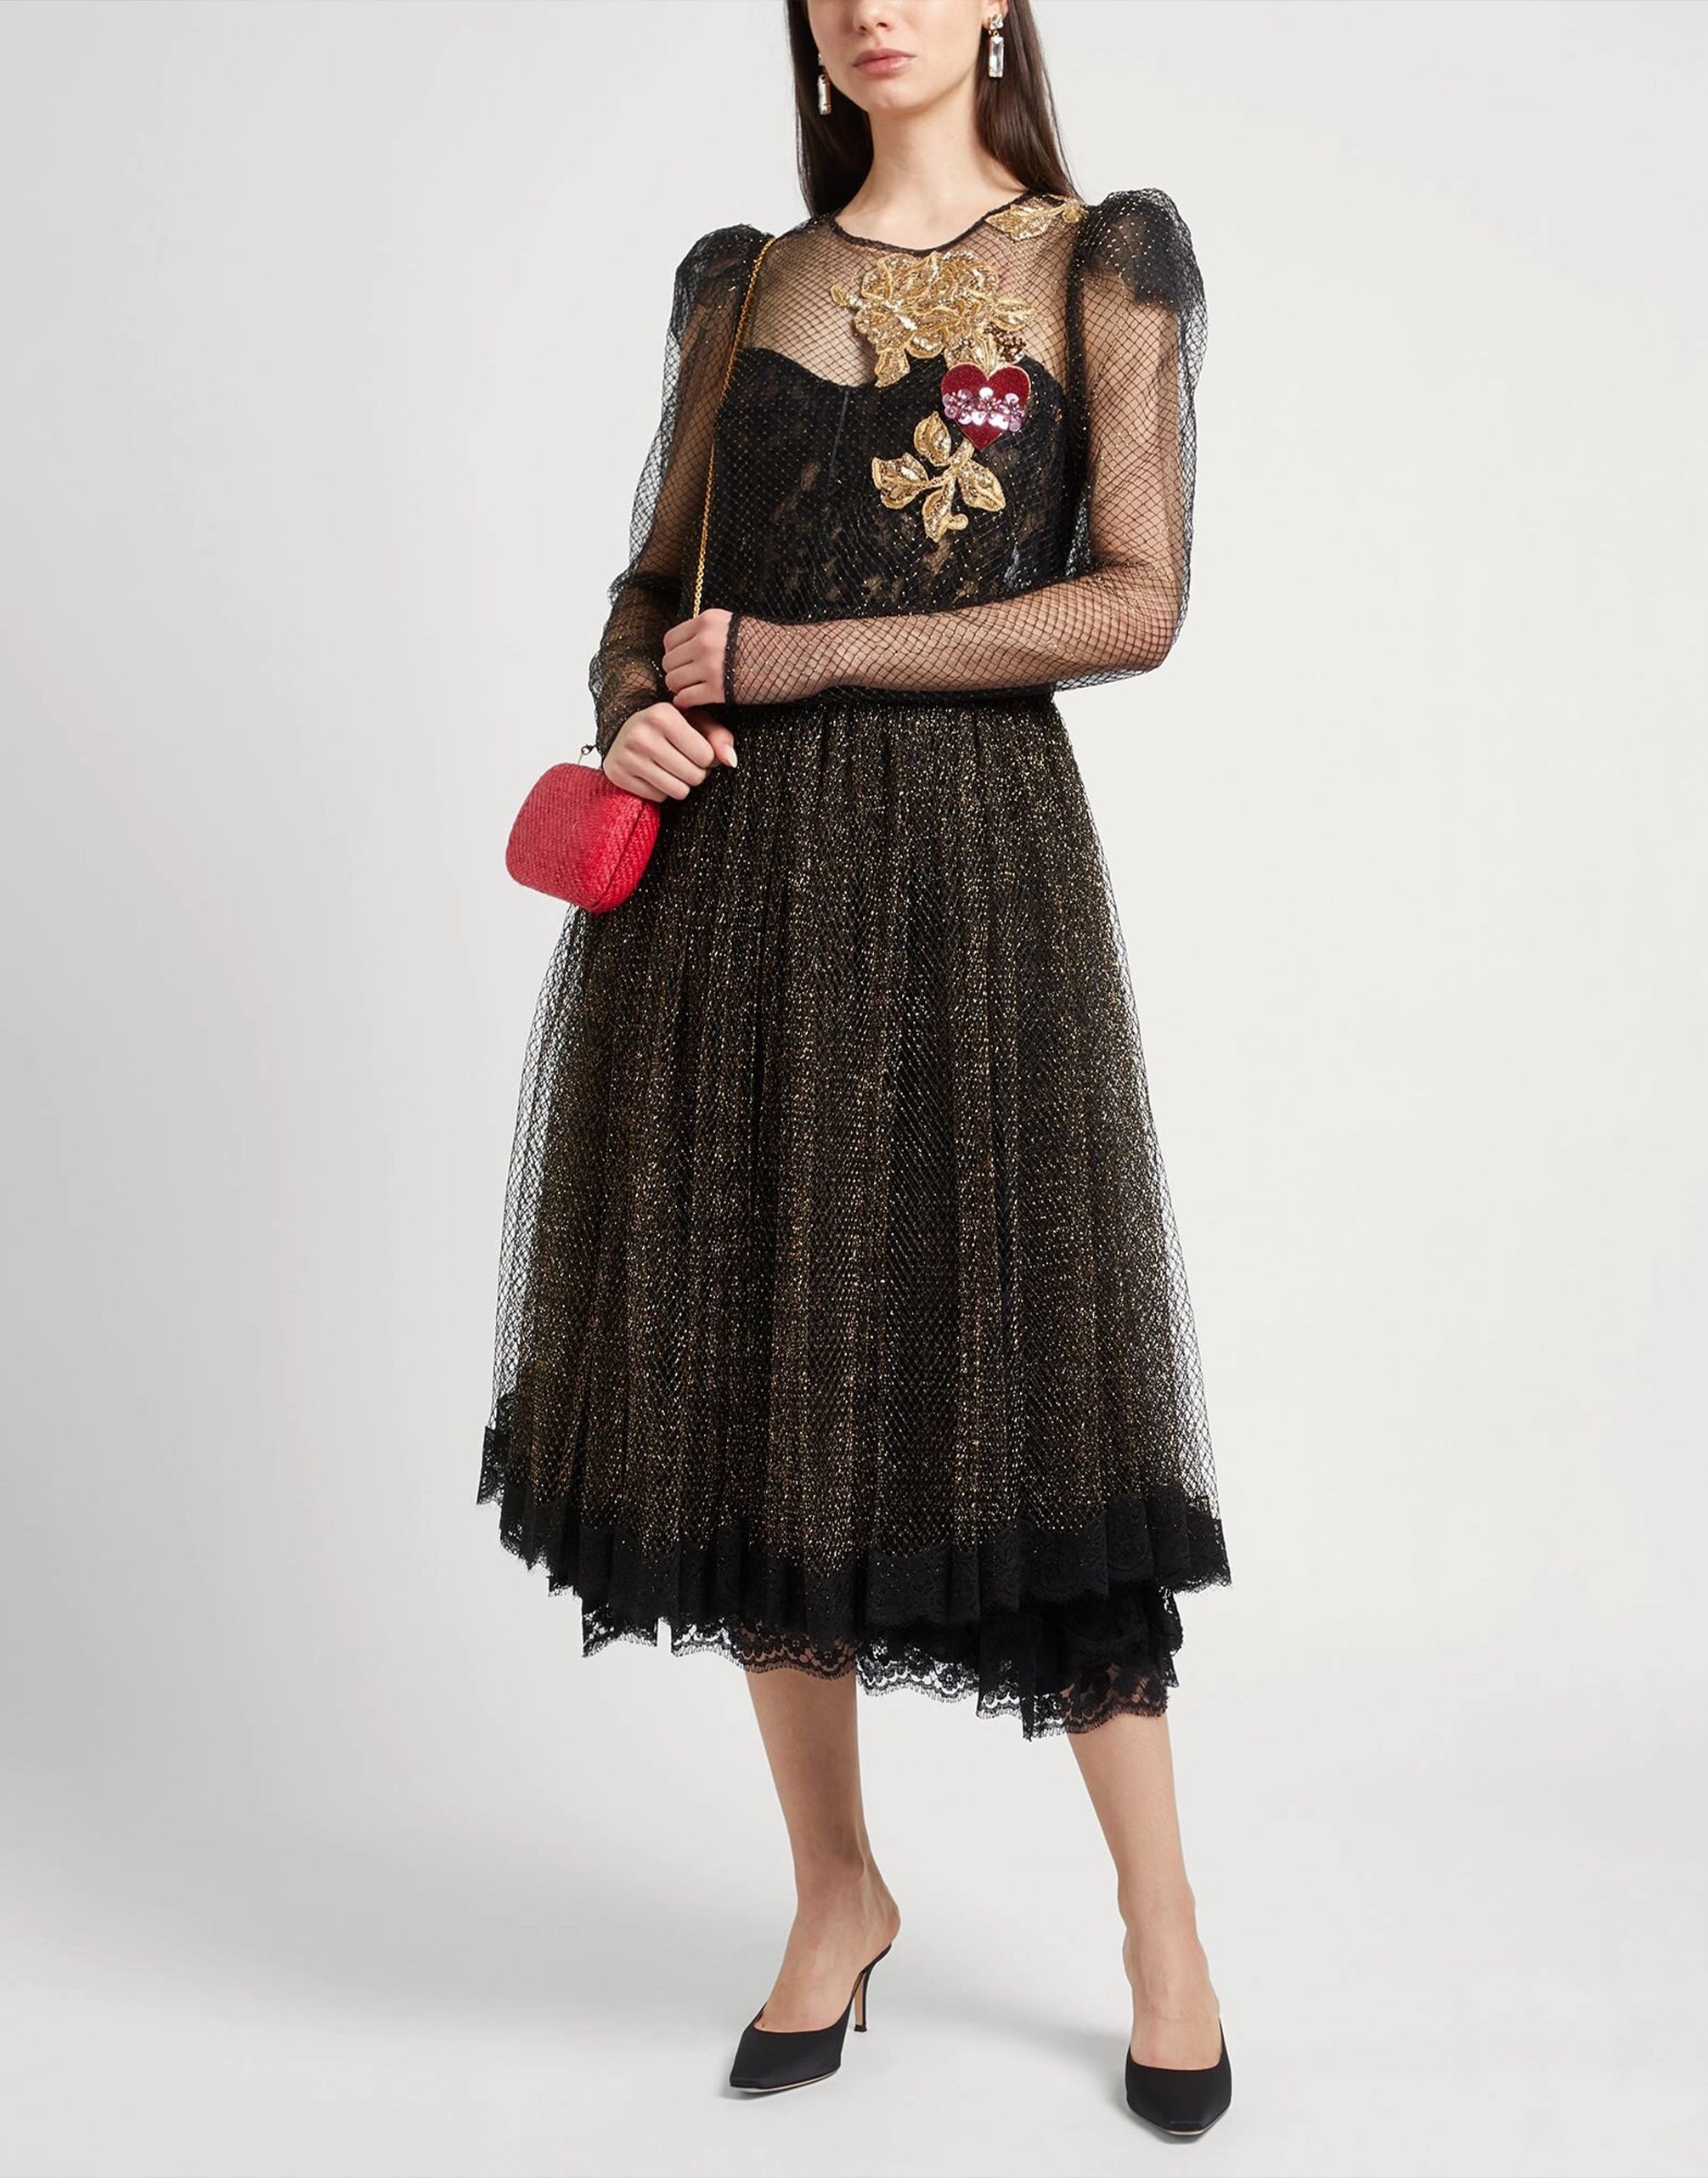 Mesh Dress With Crystal And Floral Embellishments